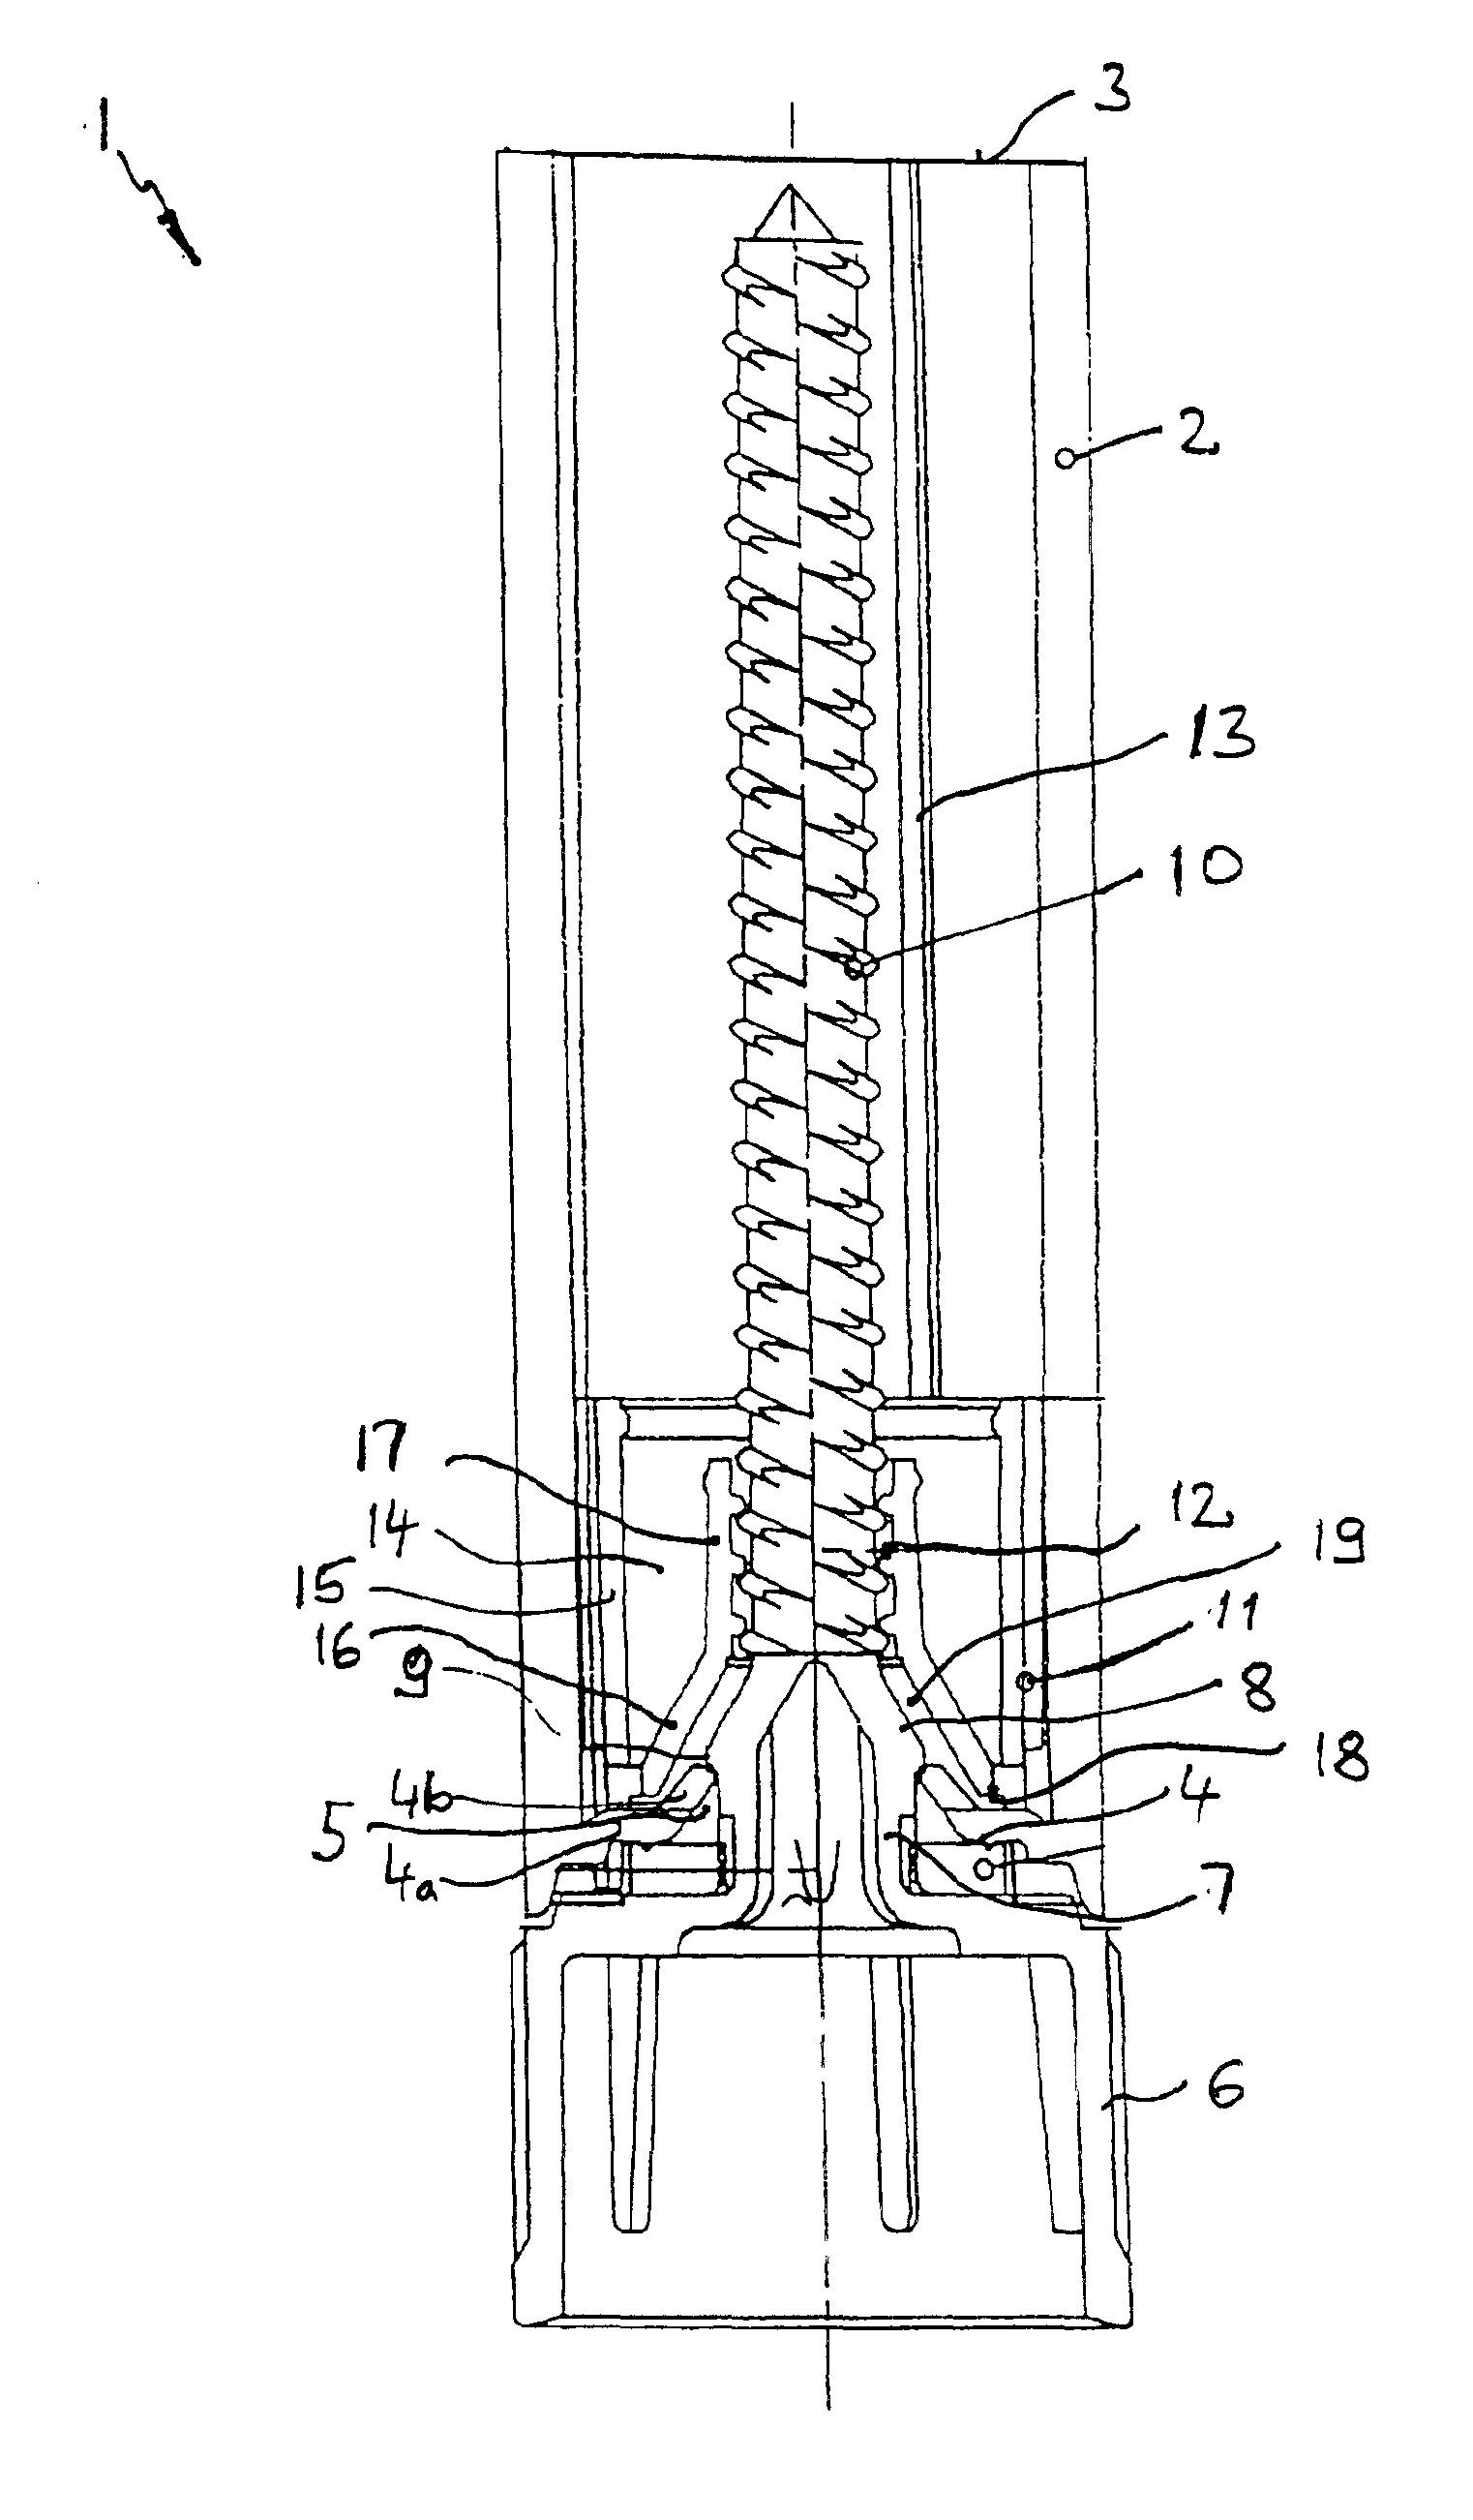 Device for receiving and dispensing a coatable material